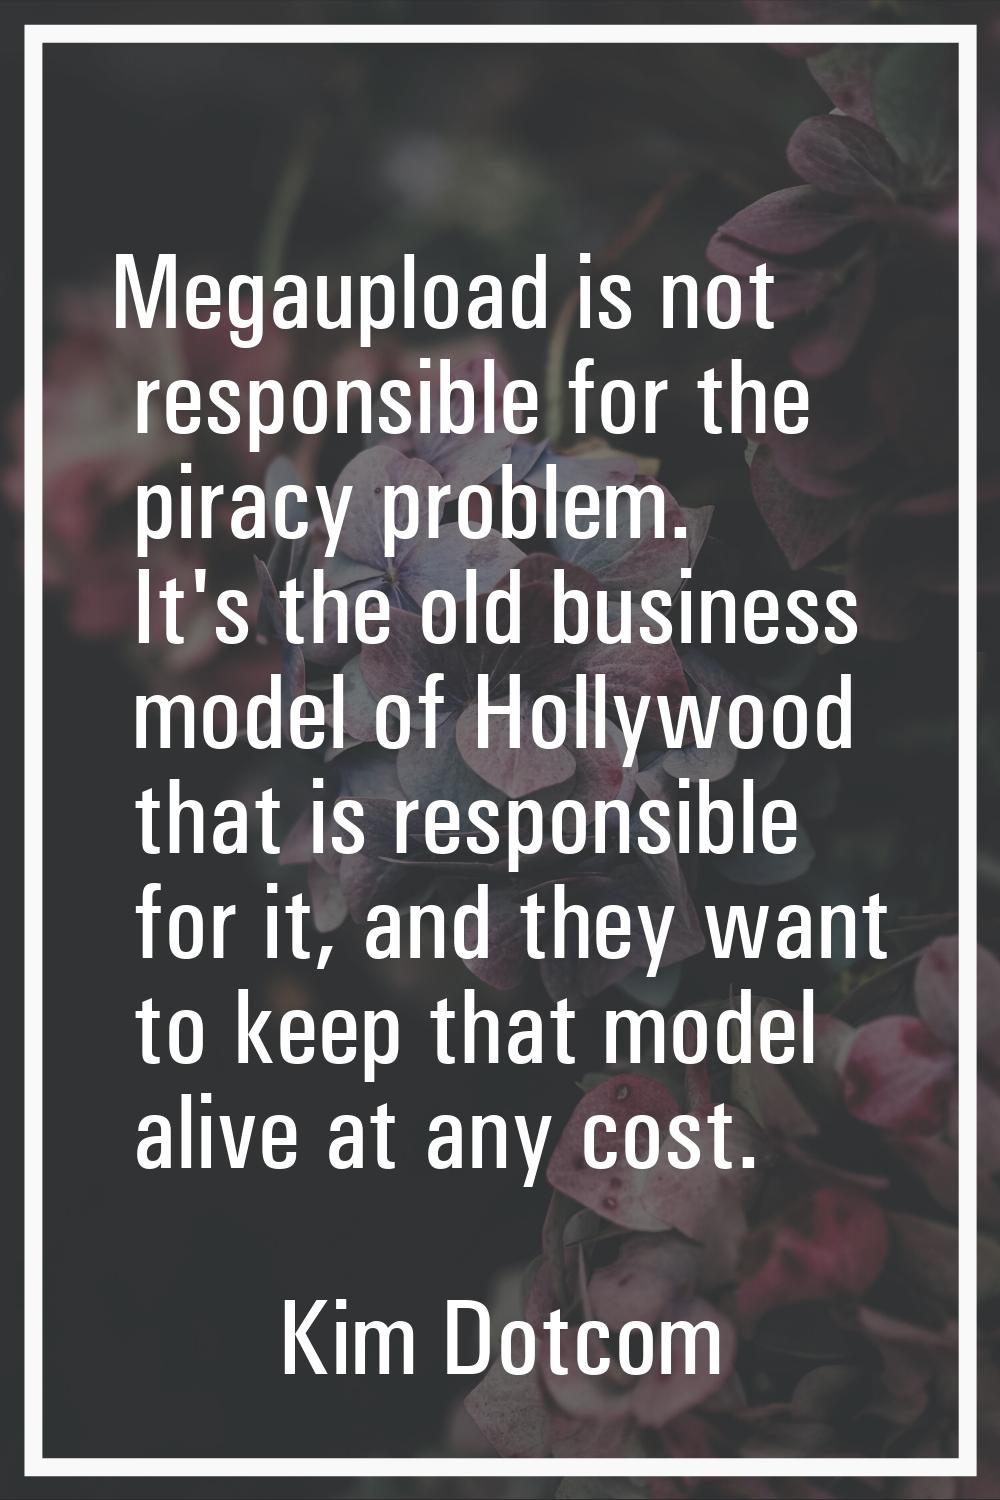 Megaupload is not responsible for the piracy problem. It's the old business model of Hollywood that